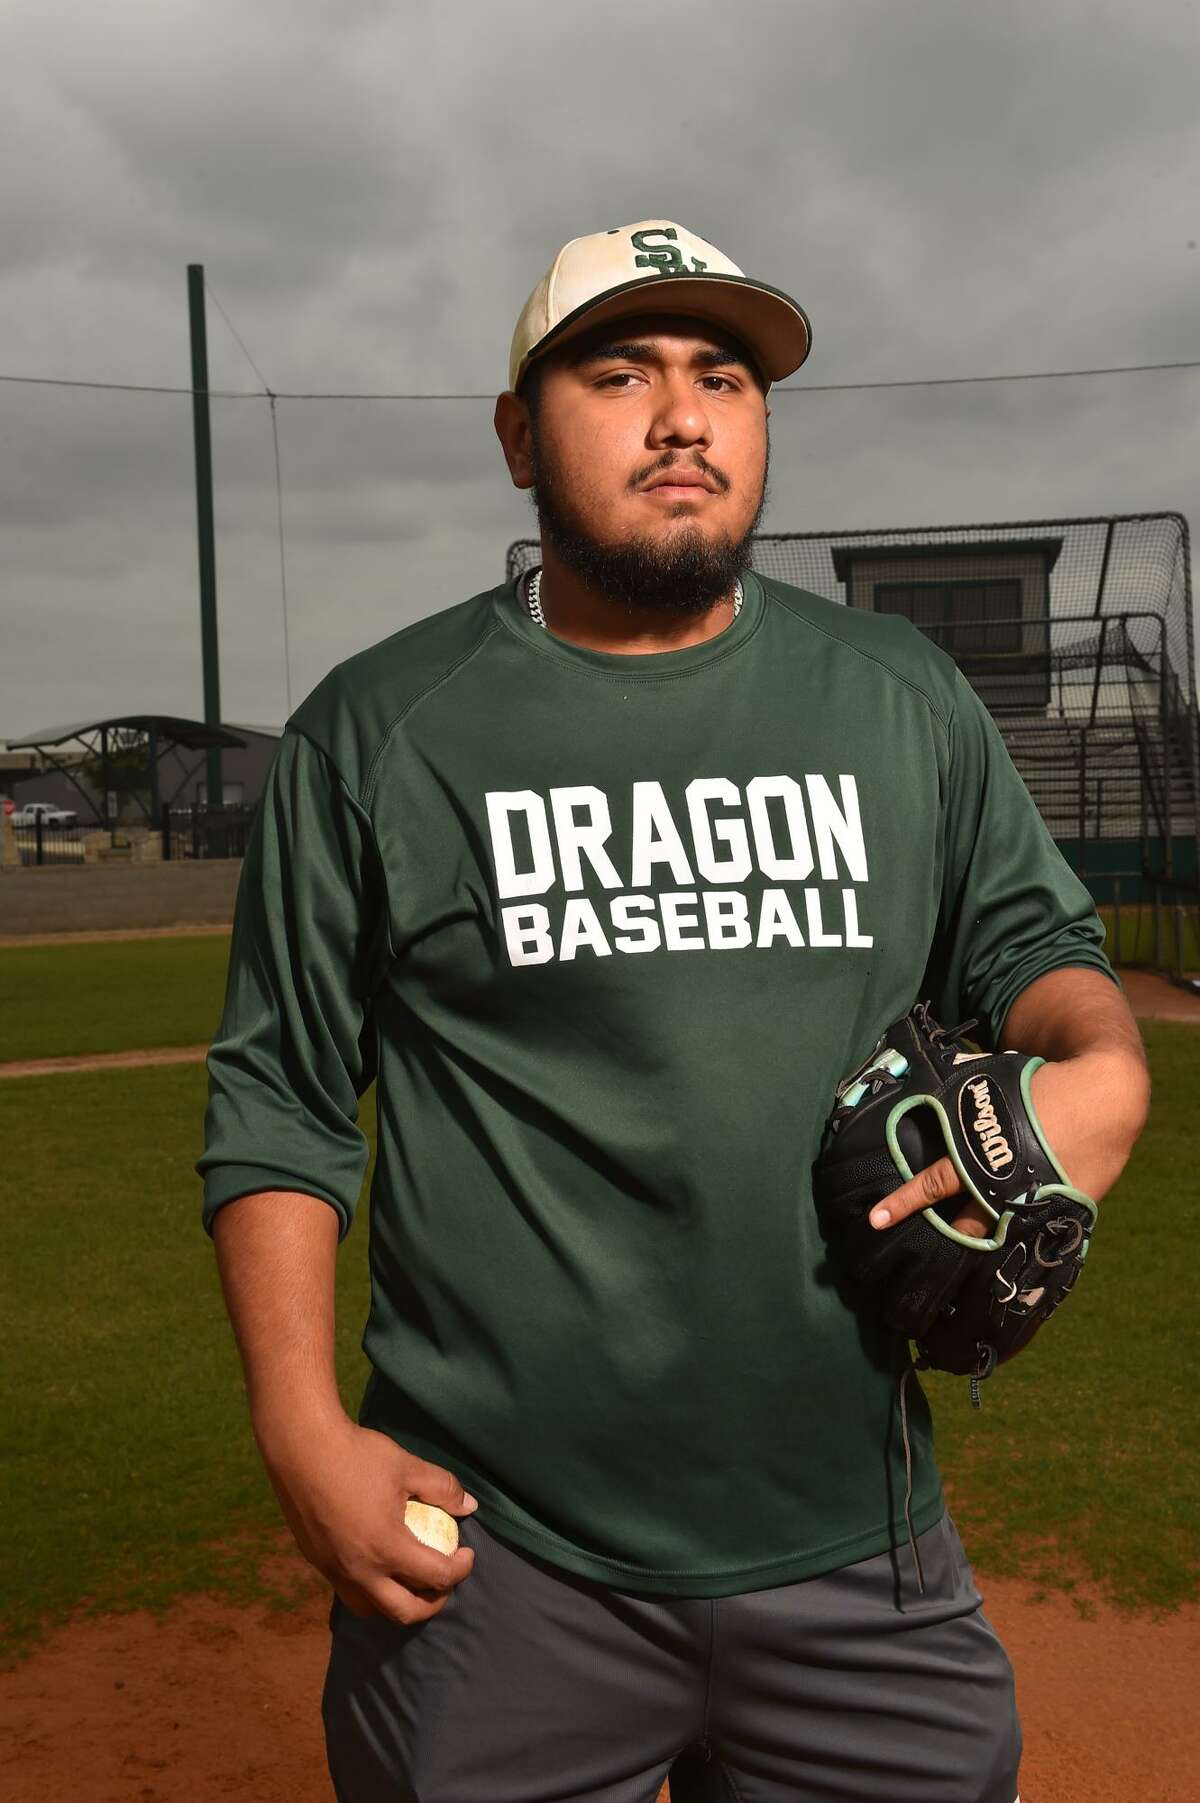 Southwest High School senior Luis Padilla has helped the Dragons to their first appearance in the third round of the playoffs.